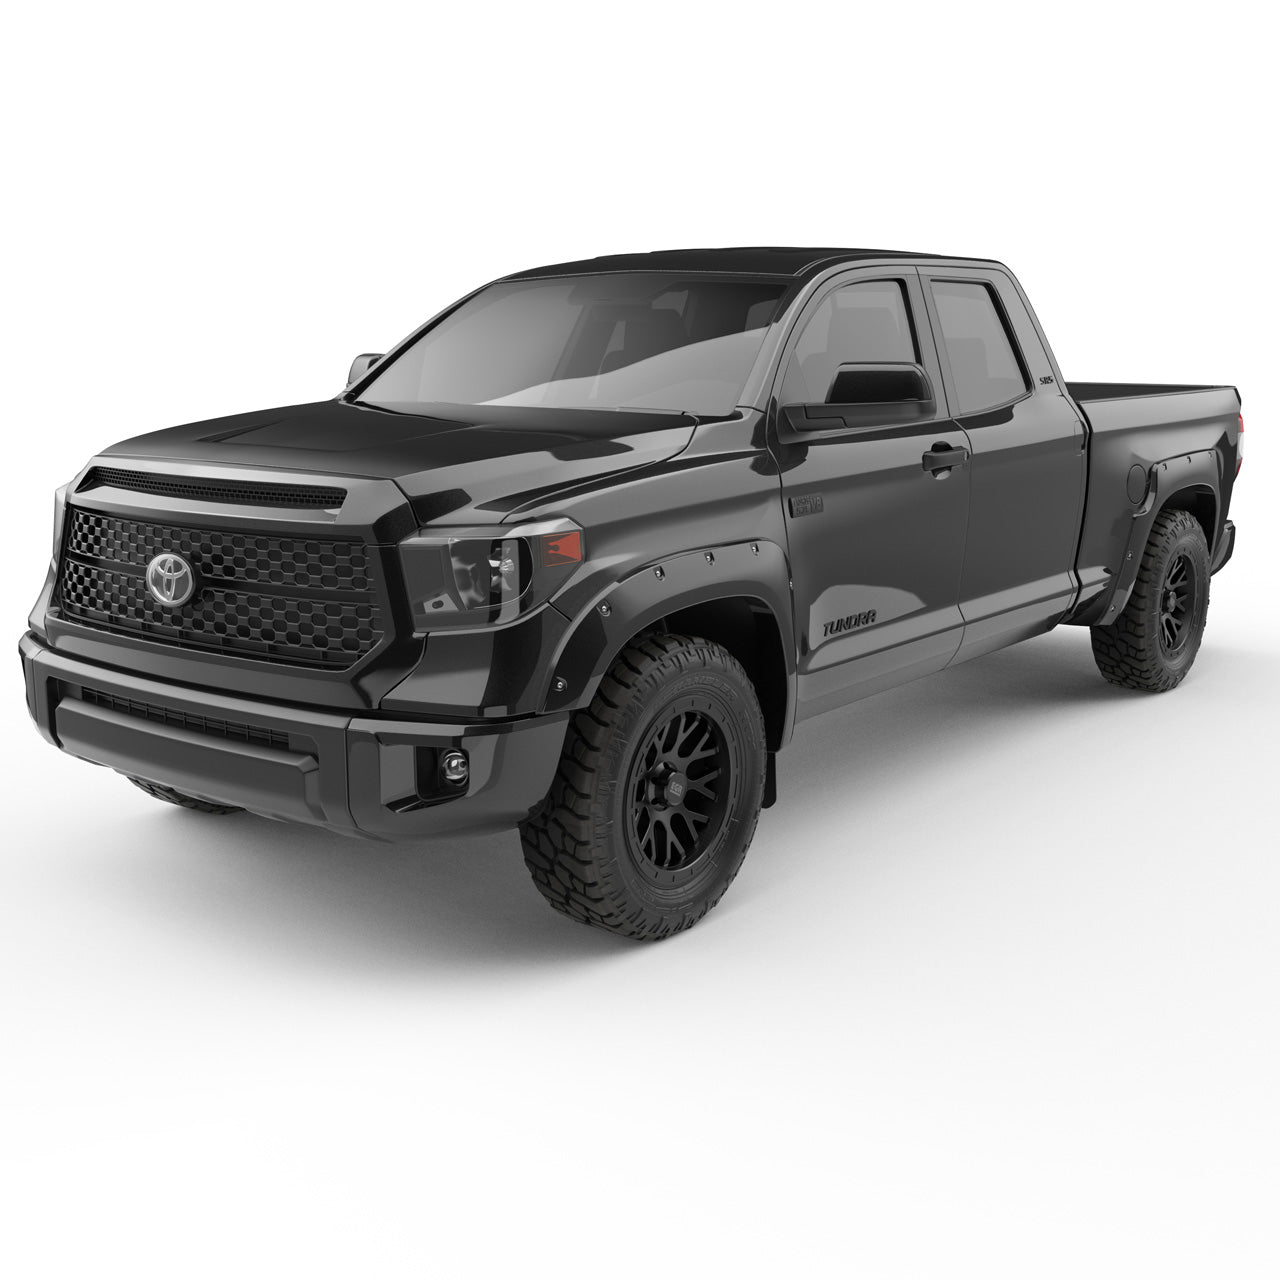 EGR Traditional Bolt-on look Fender Flares - 14-21 Toyota Tundra Painted to Code Black set of 4